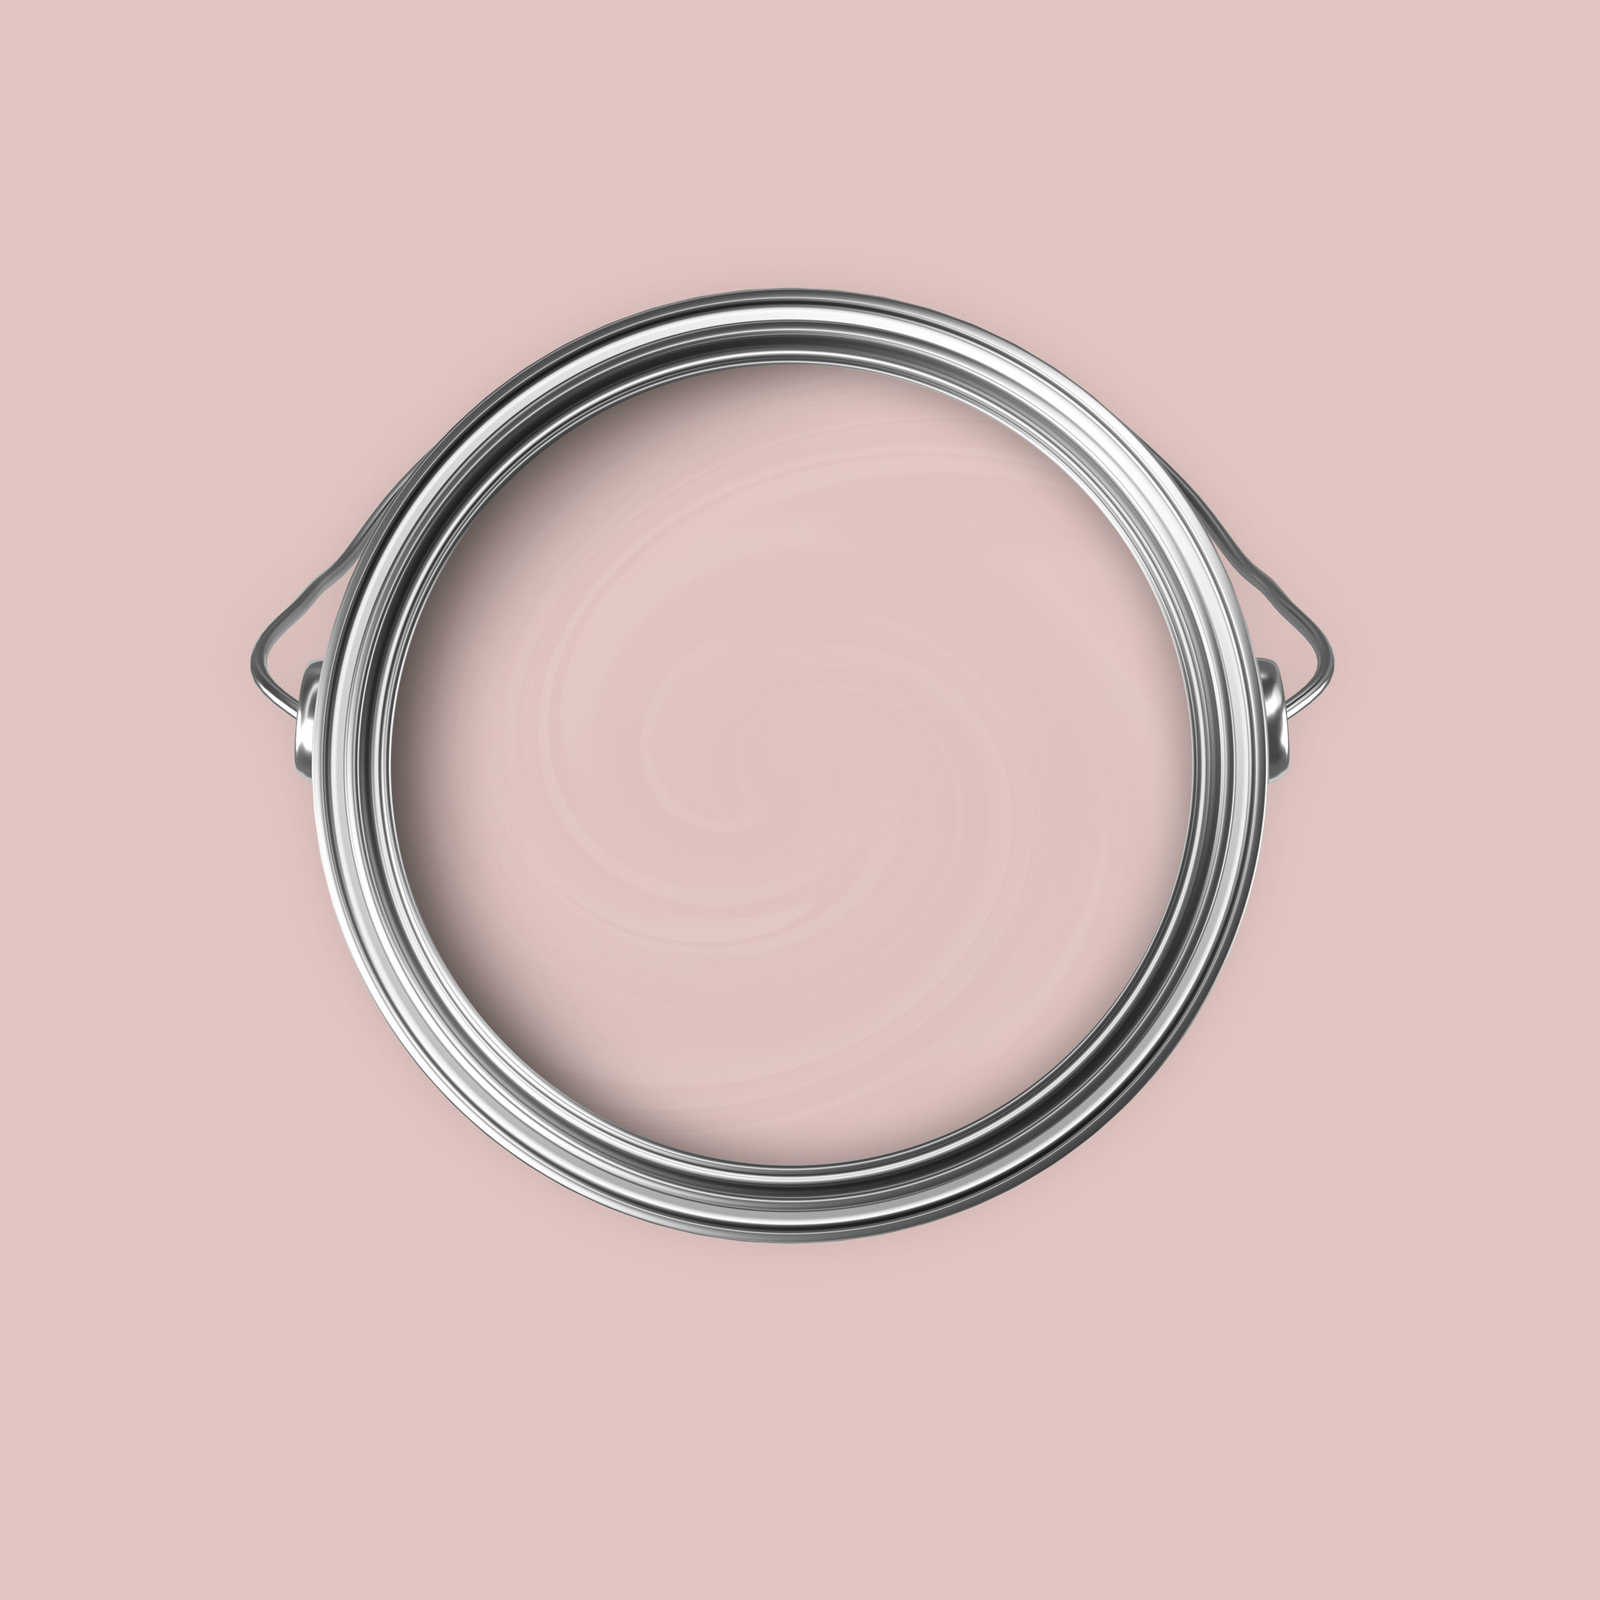             Premium Wall Paint Soft Old Pink »Natural Nude« NW1013 – 5 litre
        